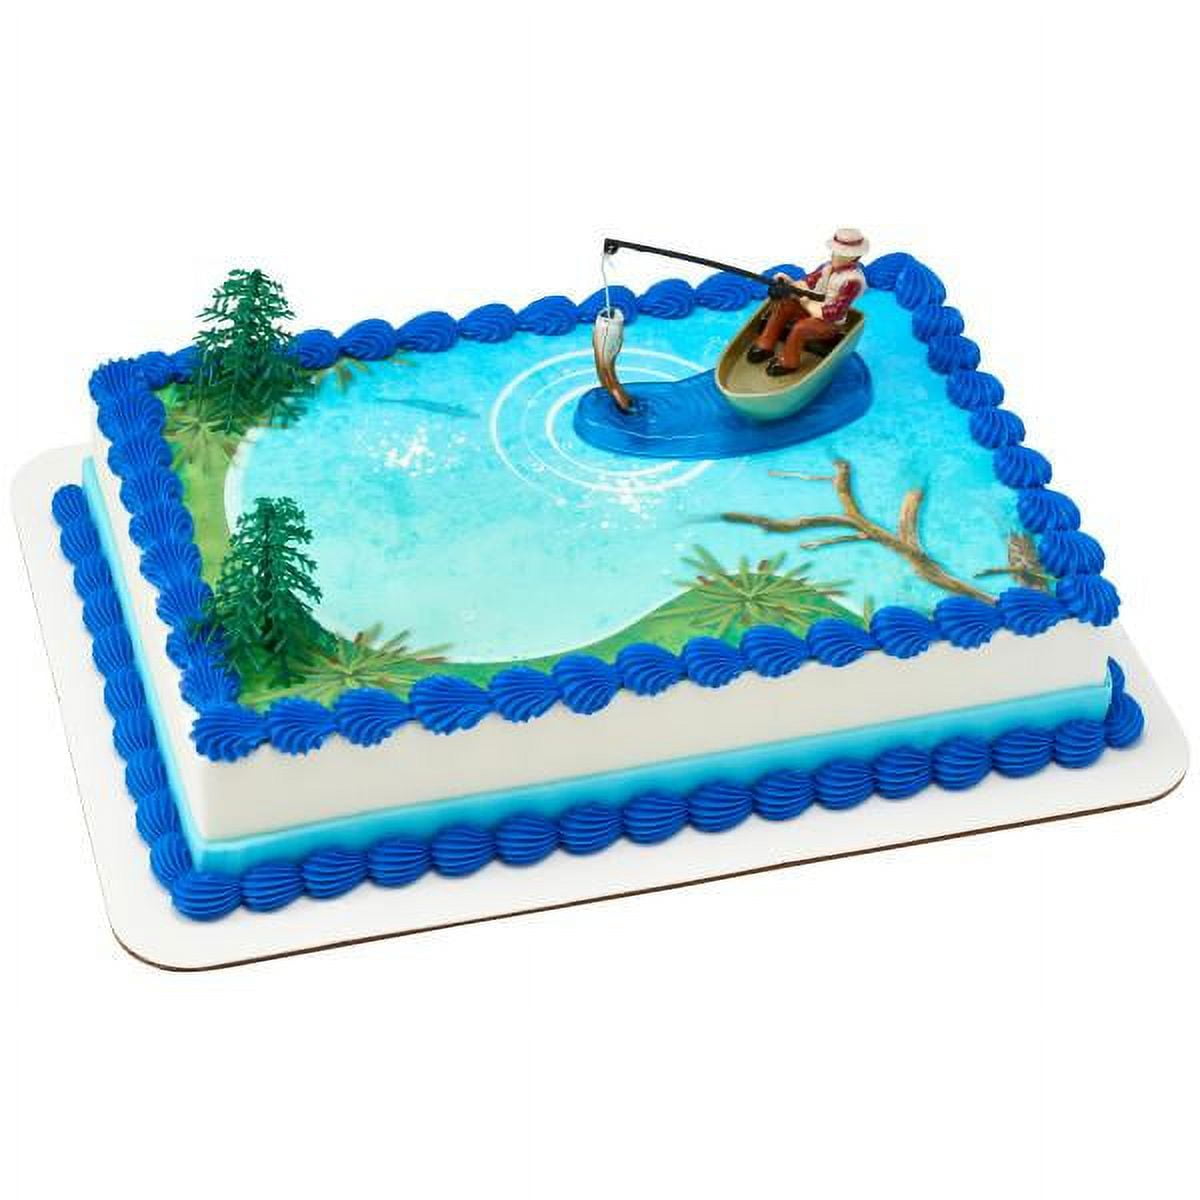 Fishing with Action DecoSet with 1/4 sheet Edible Cake Topper Image  Background Party